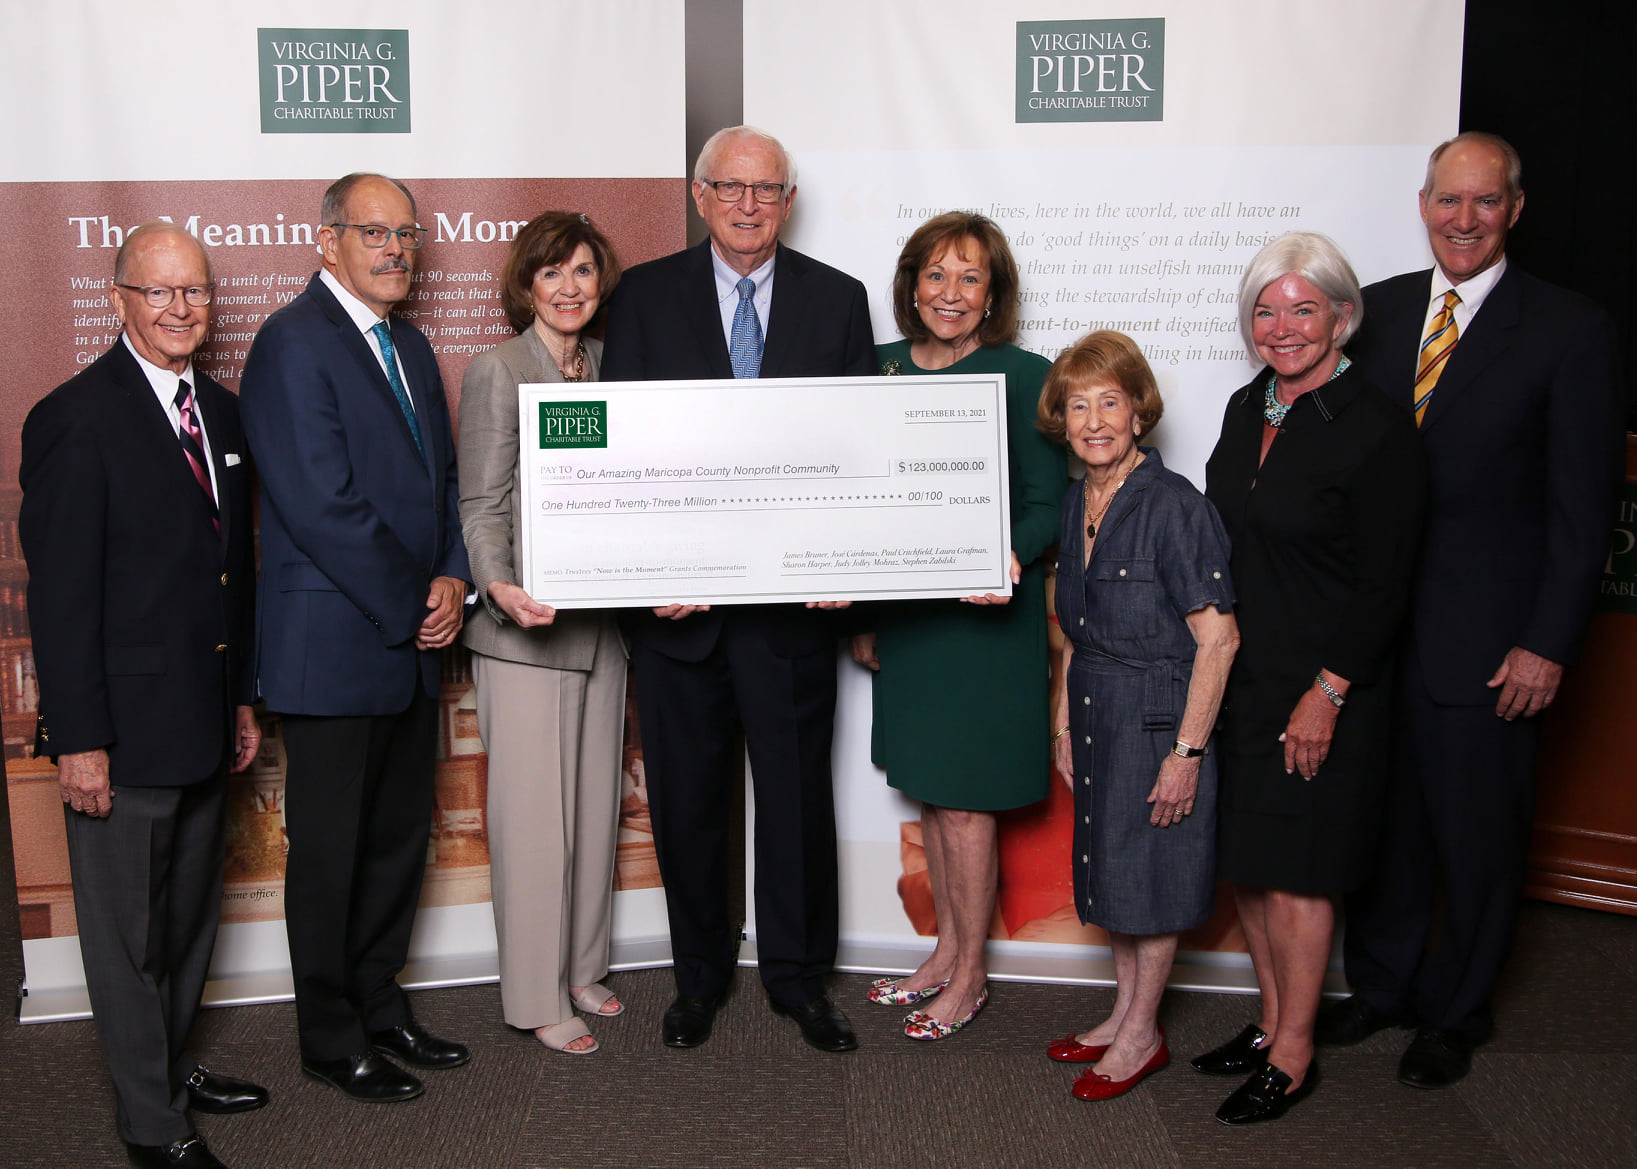 Act One Receives Surprise $250 Thousand Dollar Grant From Virginia G. Piper Charitable Trust